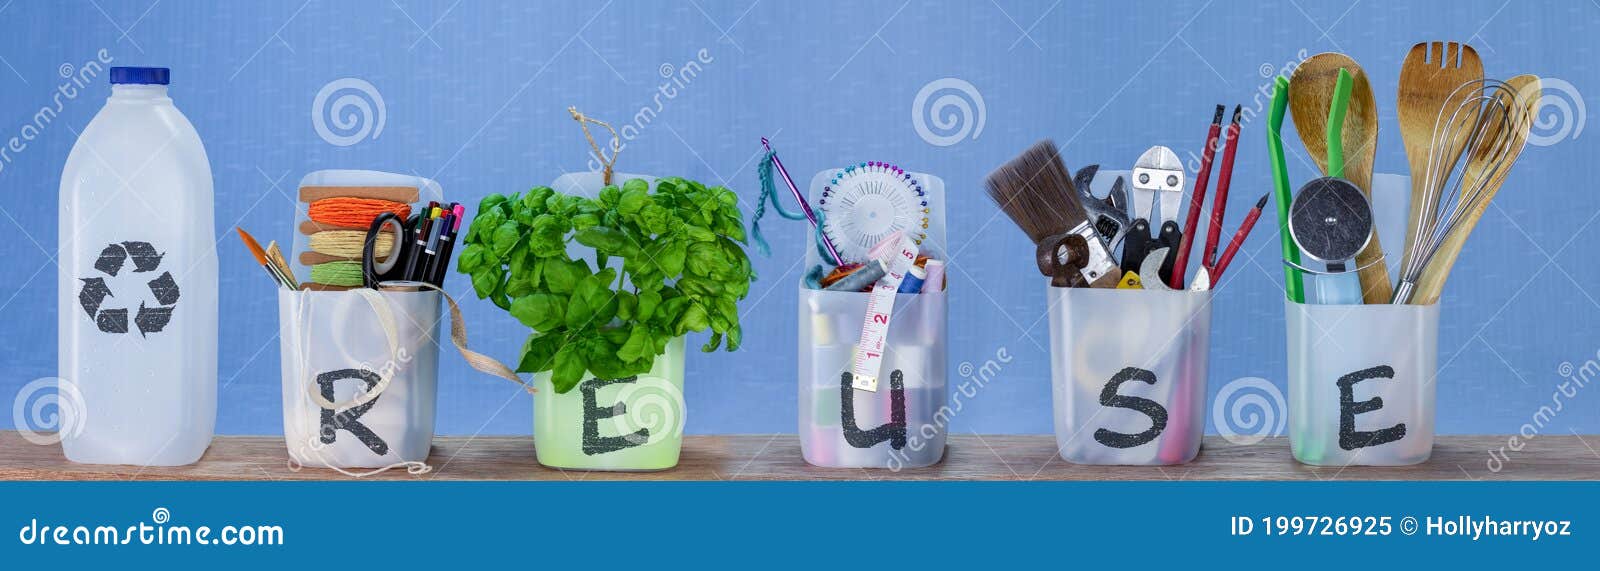 https://thumbs.dreamstime.com/z/plastic-milk-container-reused-recycled-different-contents-reuse-text-plastic-milk-container-reused-recycled-199726925.jpg